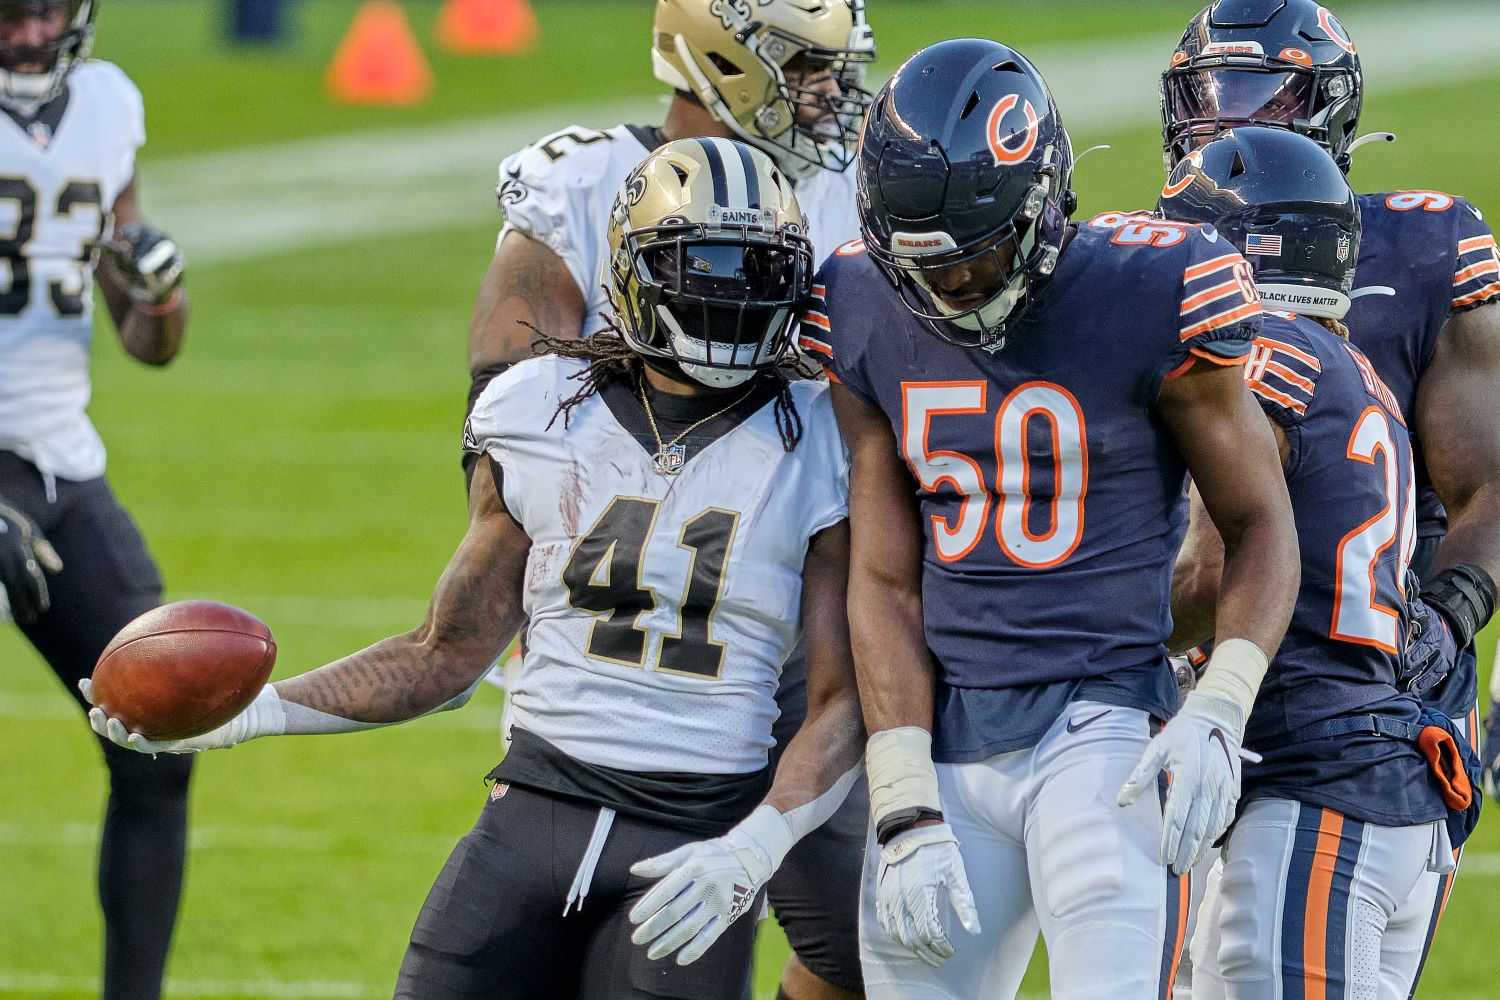 Alvin Kamara only needed three words to send a chilling warning to the Chicago Bears. Will the Saints emerge victorious on Sunday?